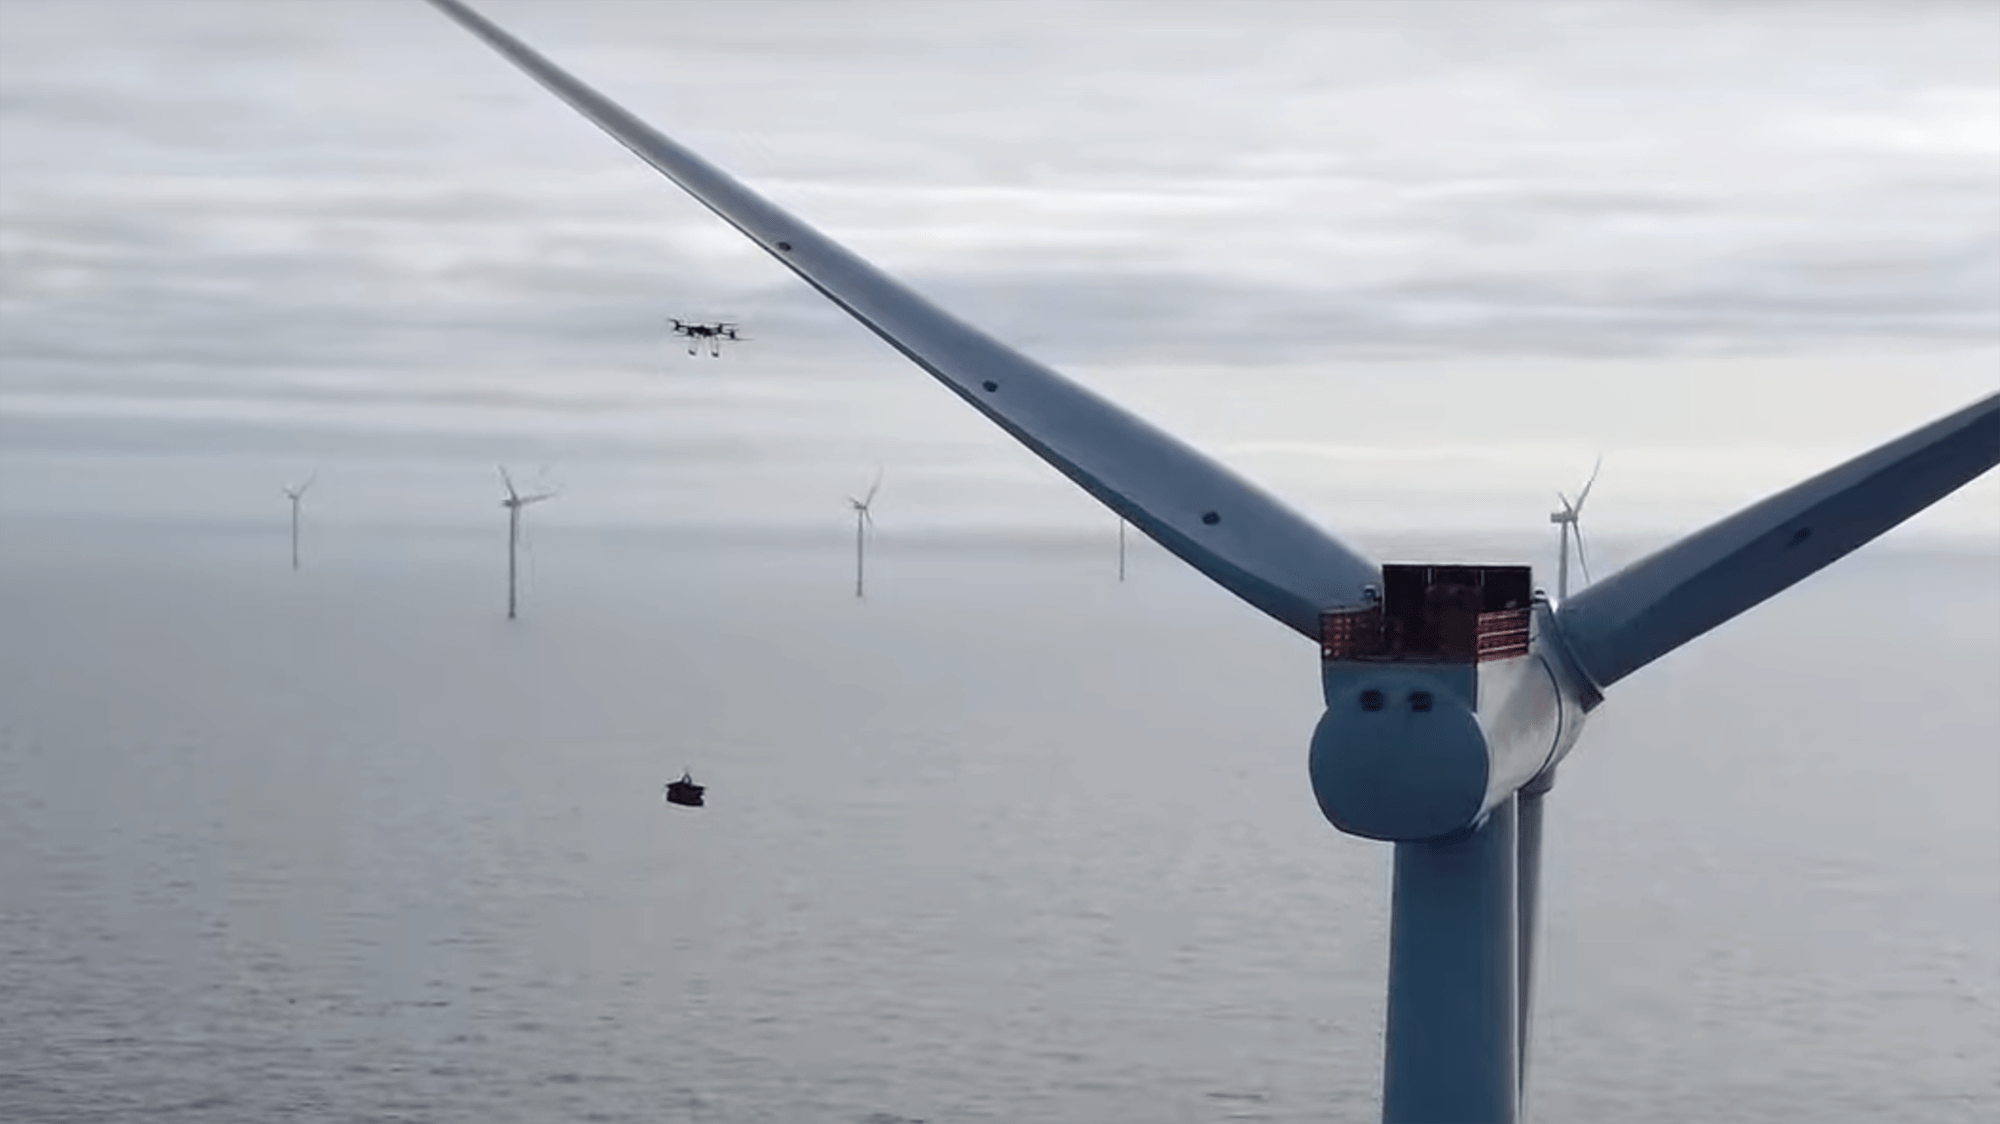 Watch a heavy-lifting drone land a perfect delivery on an offshore wind turbine